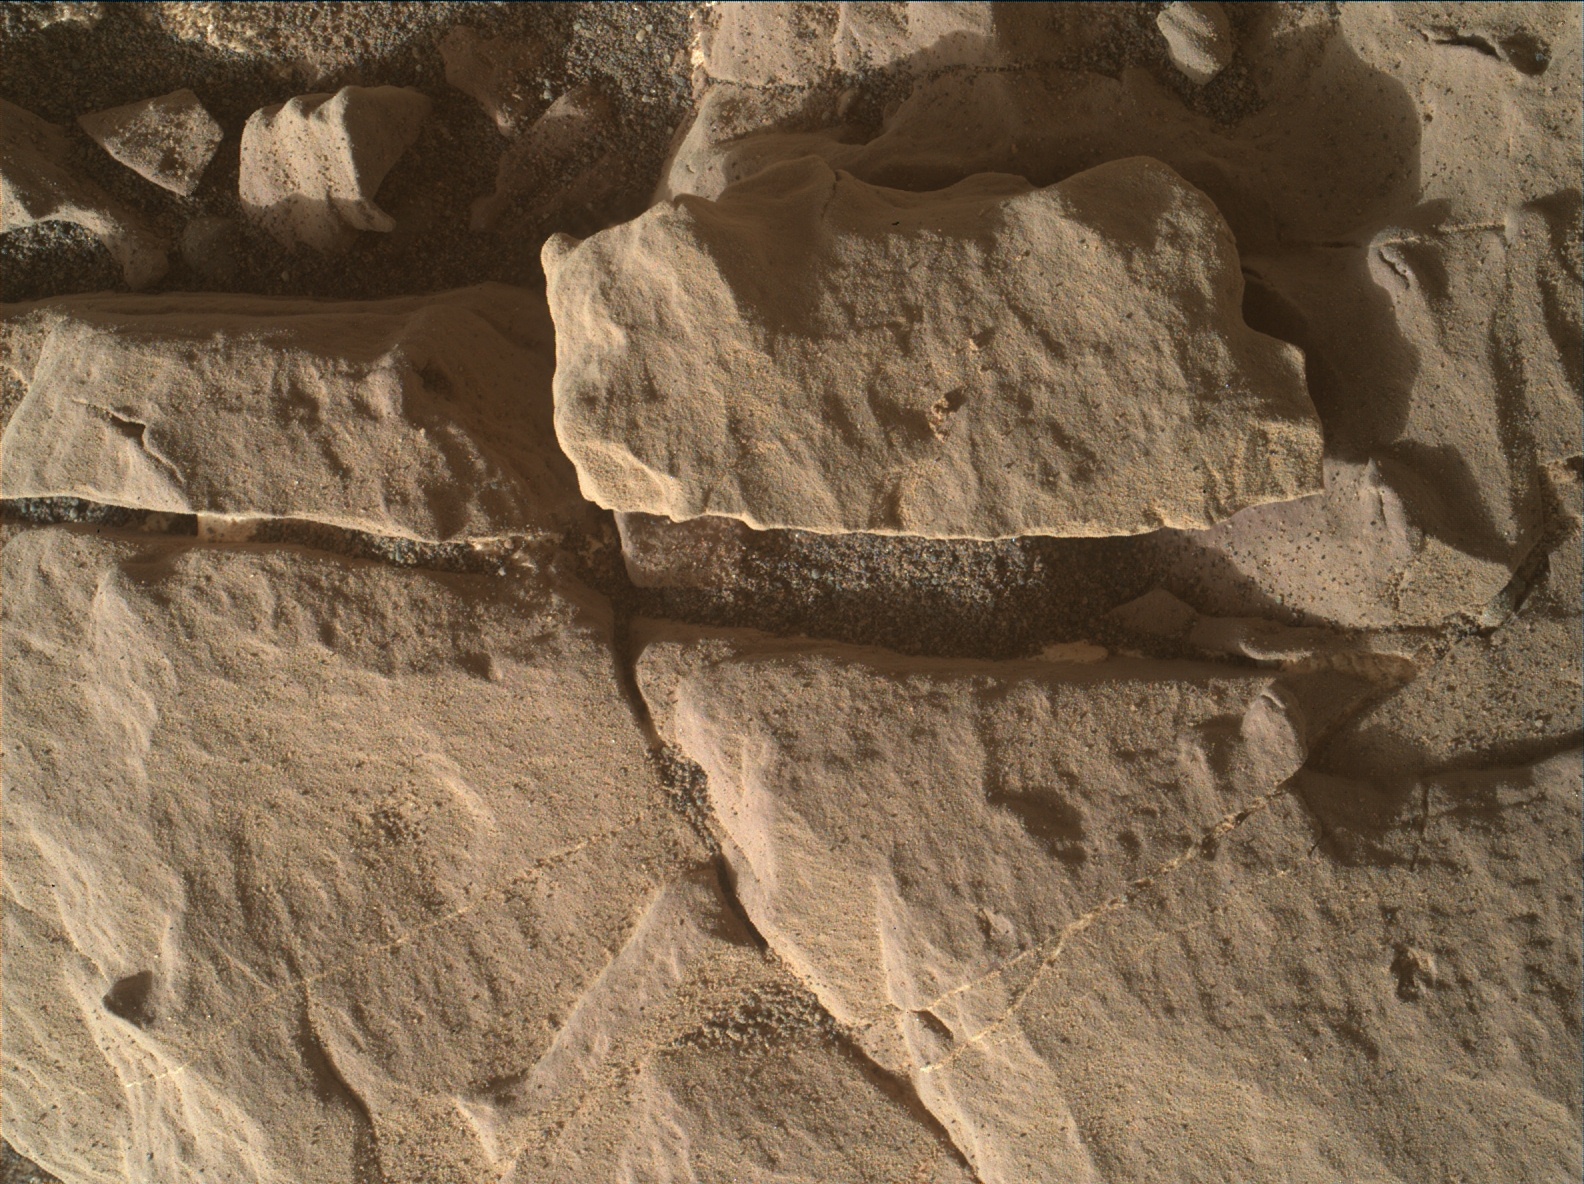 Nasa's Mars rover Curiosity acquired this image using its Mars Hand Lens Imager (MAHLI) on Sol 1867